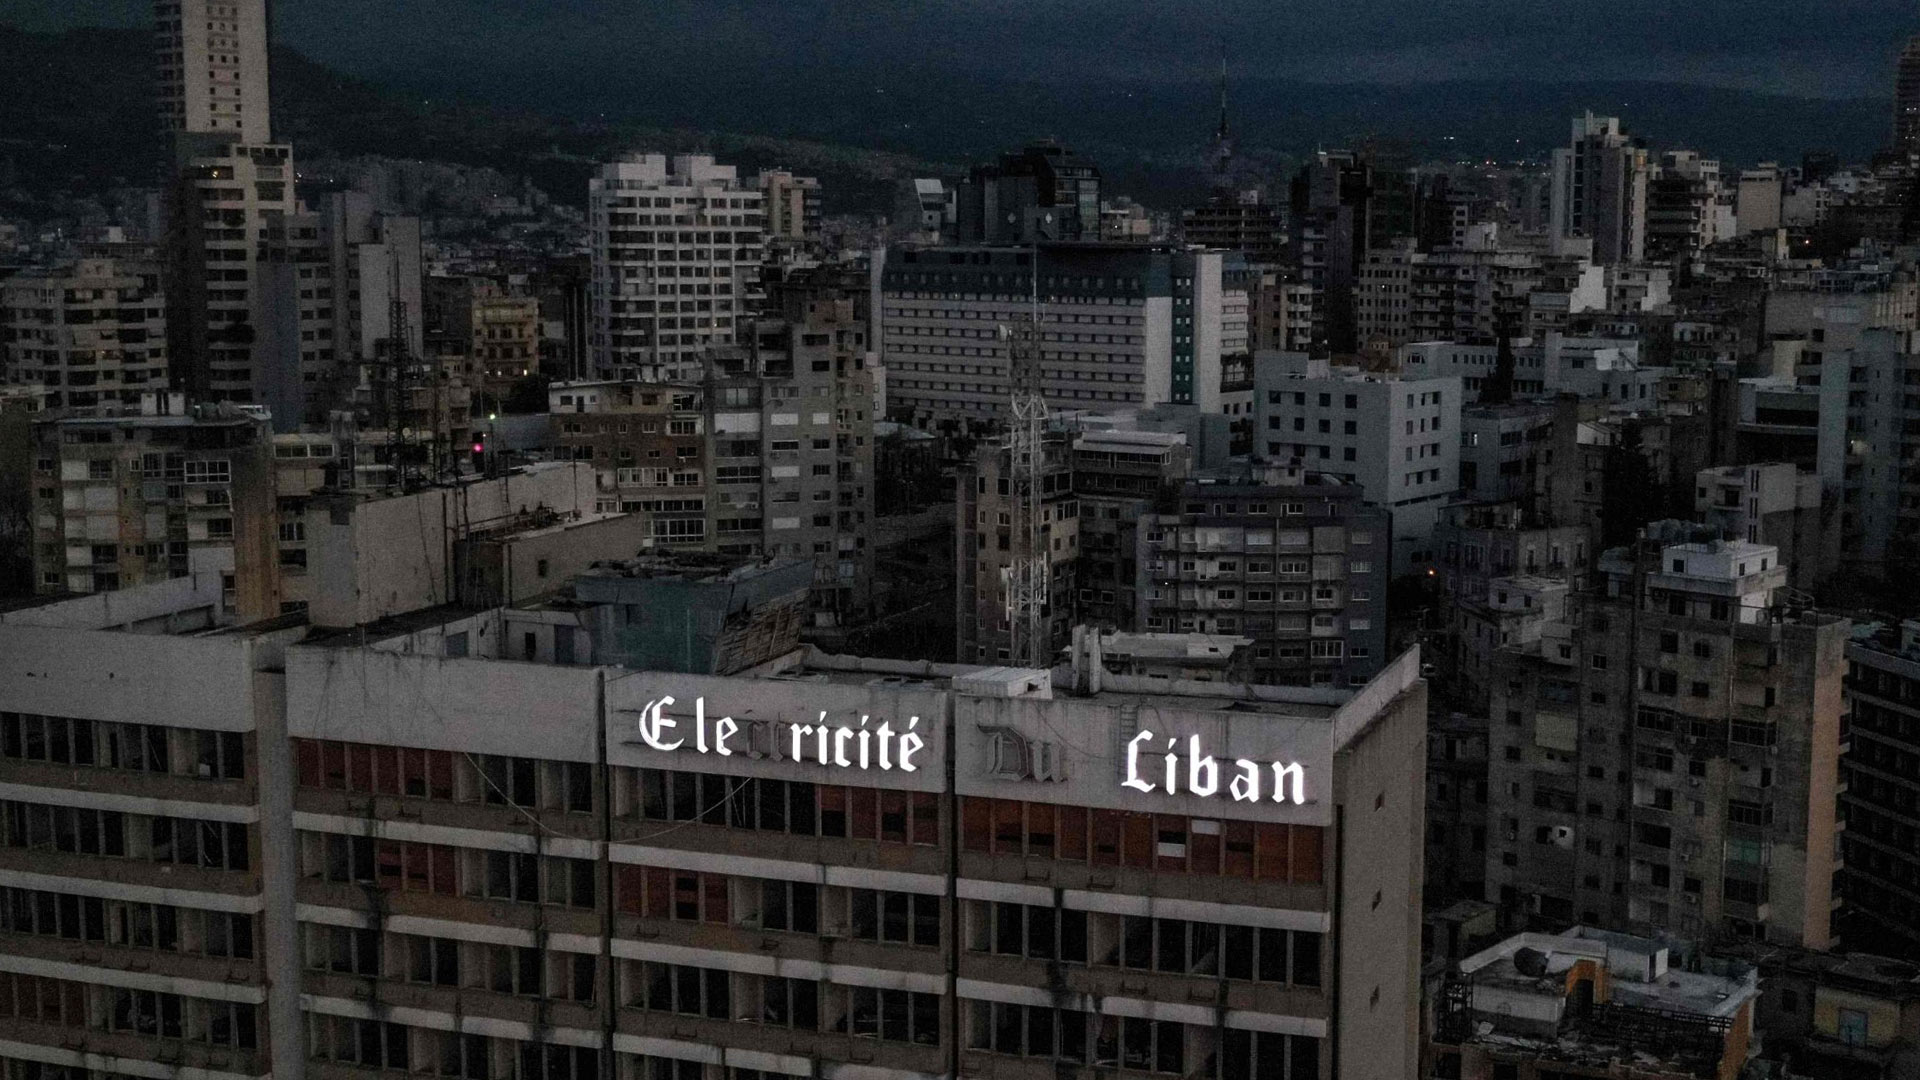 Short Circuits: Why Lebanon’s electricity sector is still broken